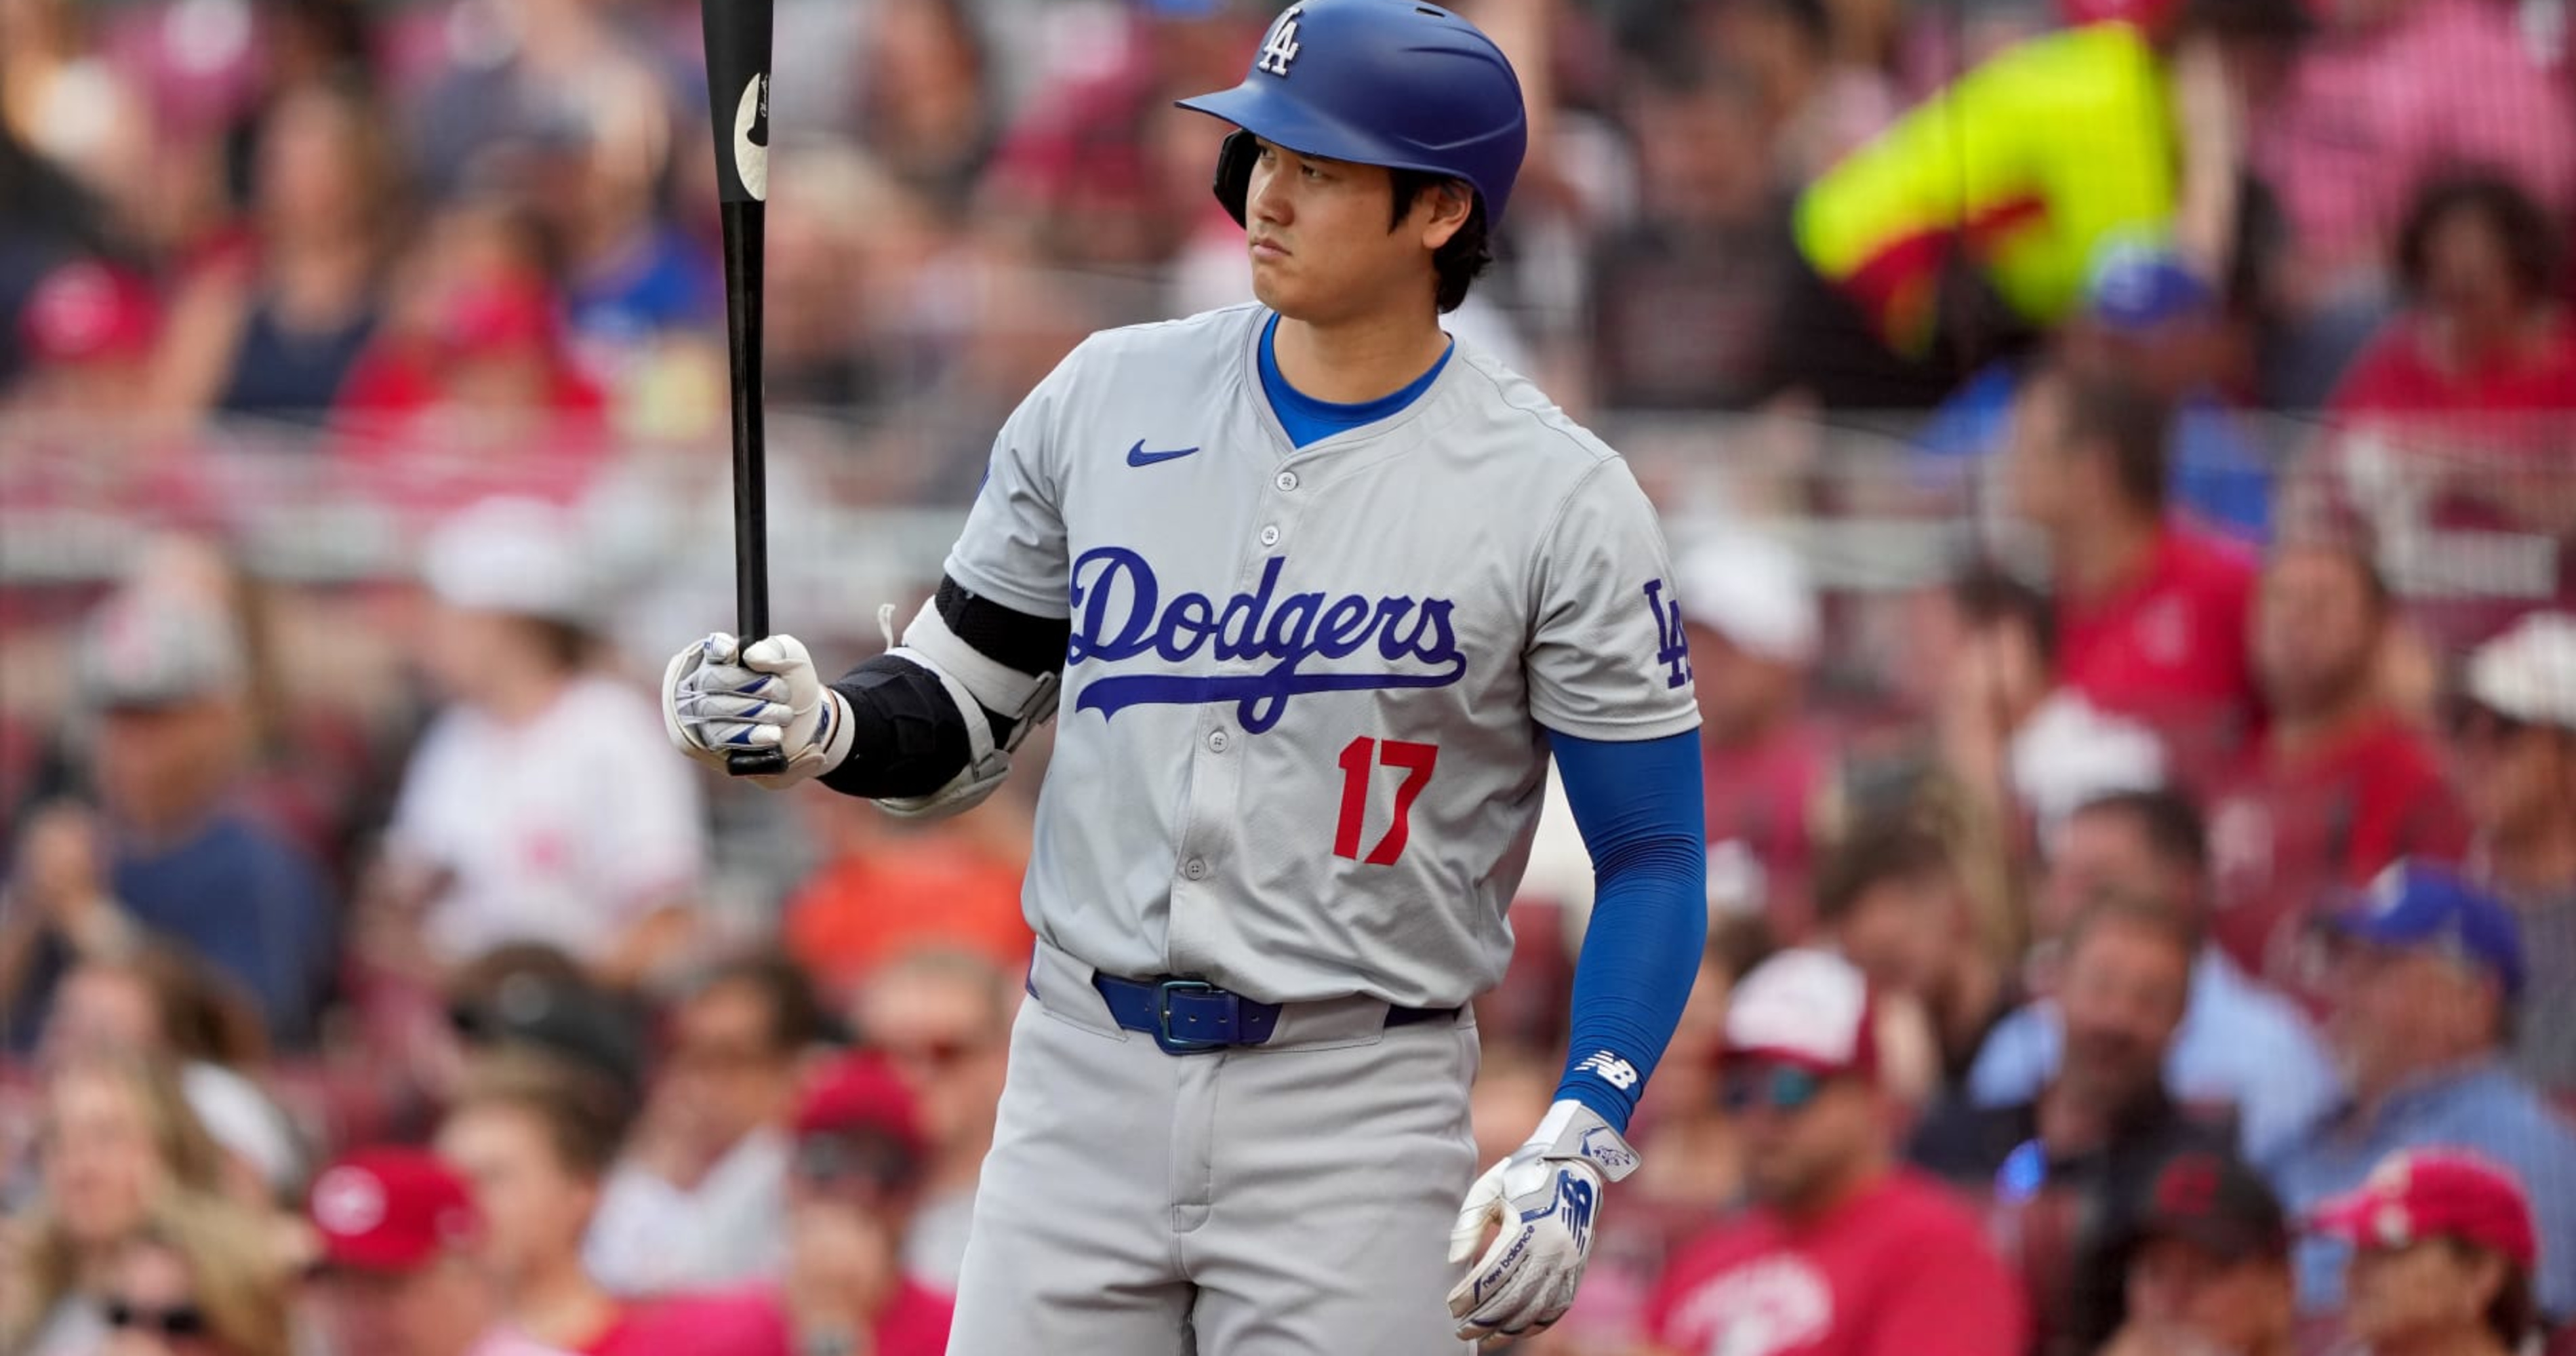 Dodgers Star Shohei Ohtani Battles Hamstring Injury, Manager Urges Caution Ahead of Reds Finale